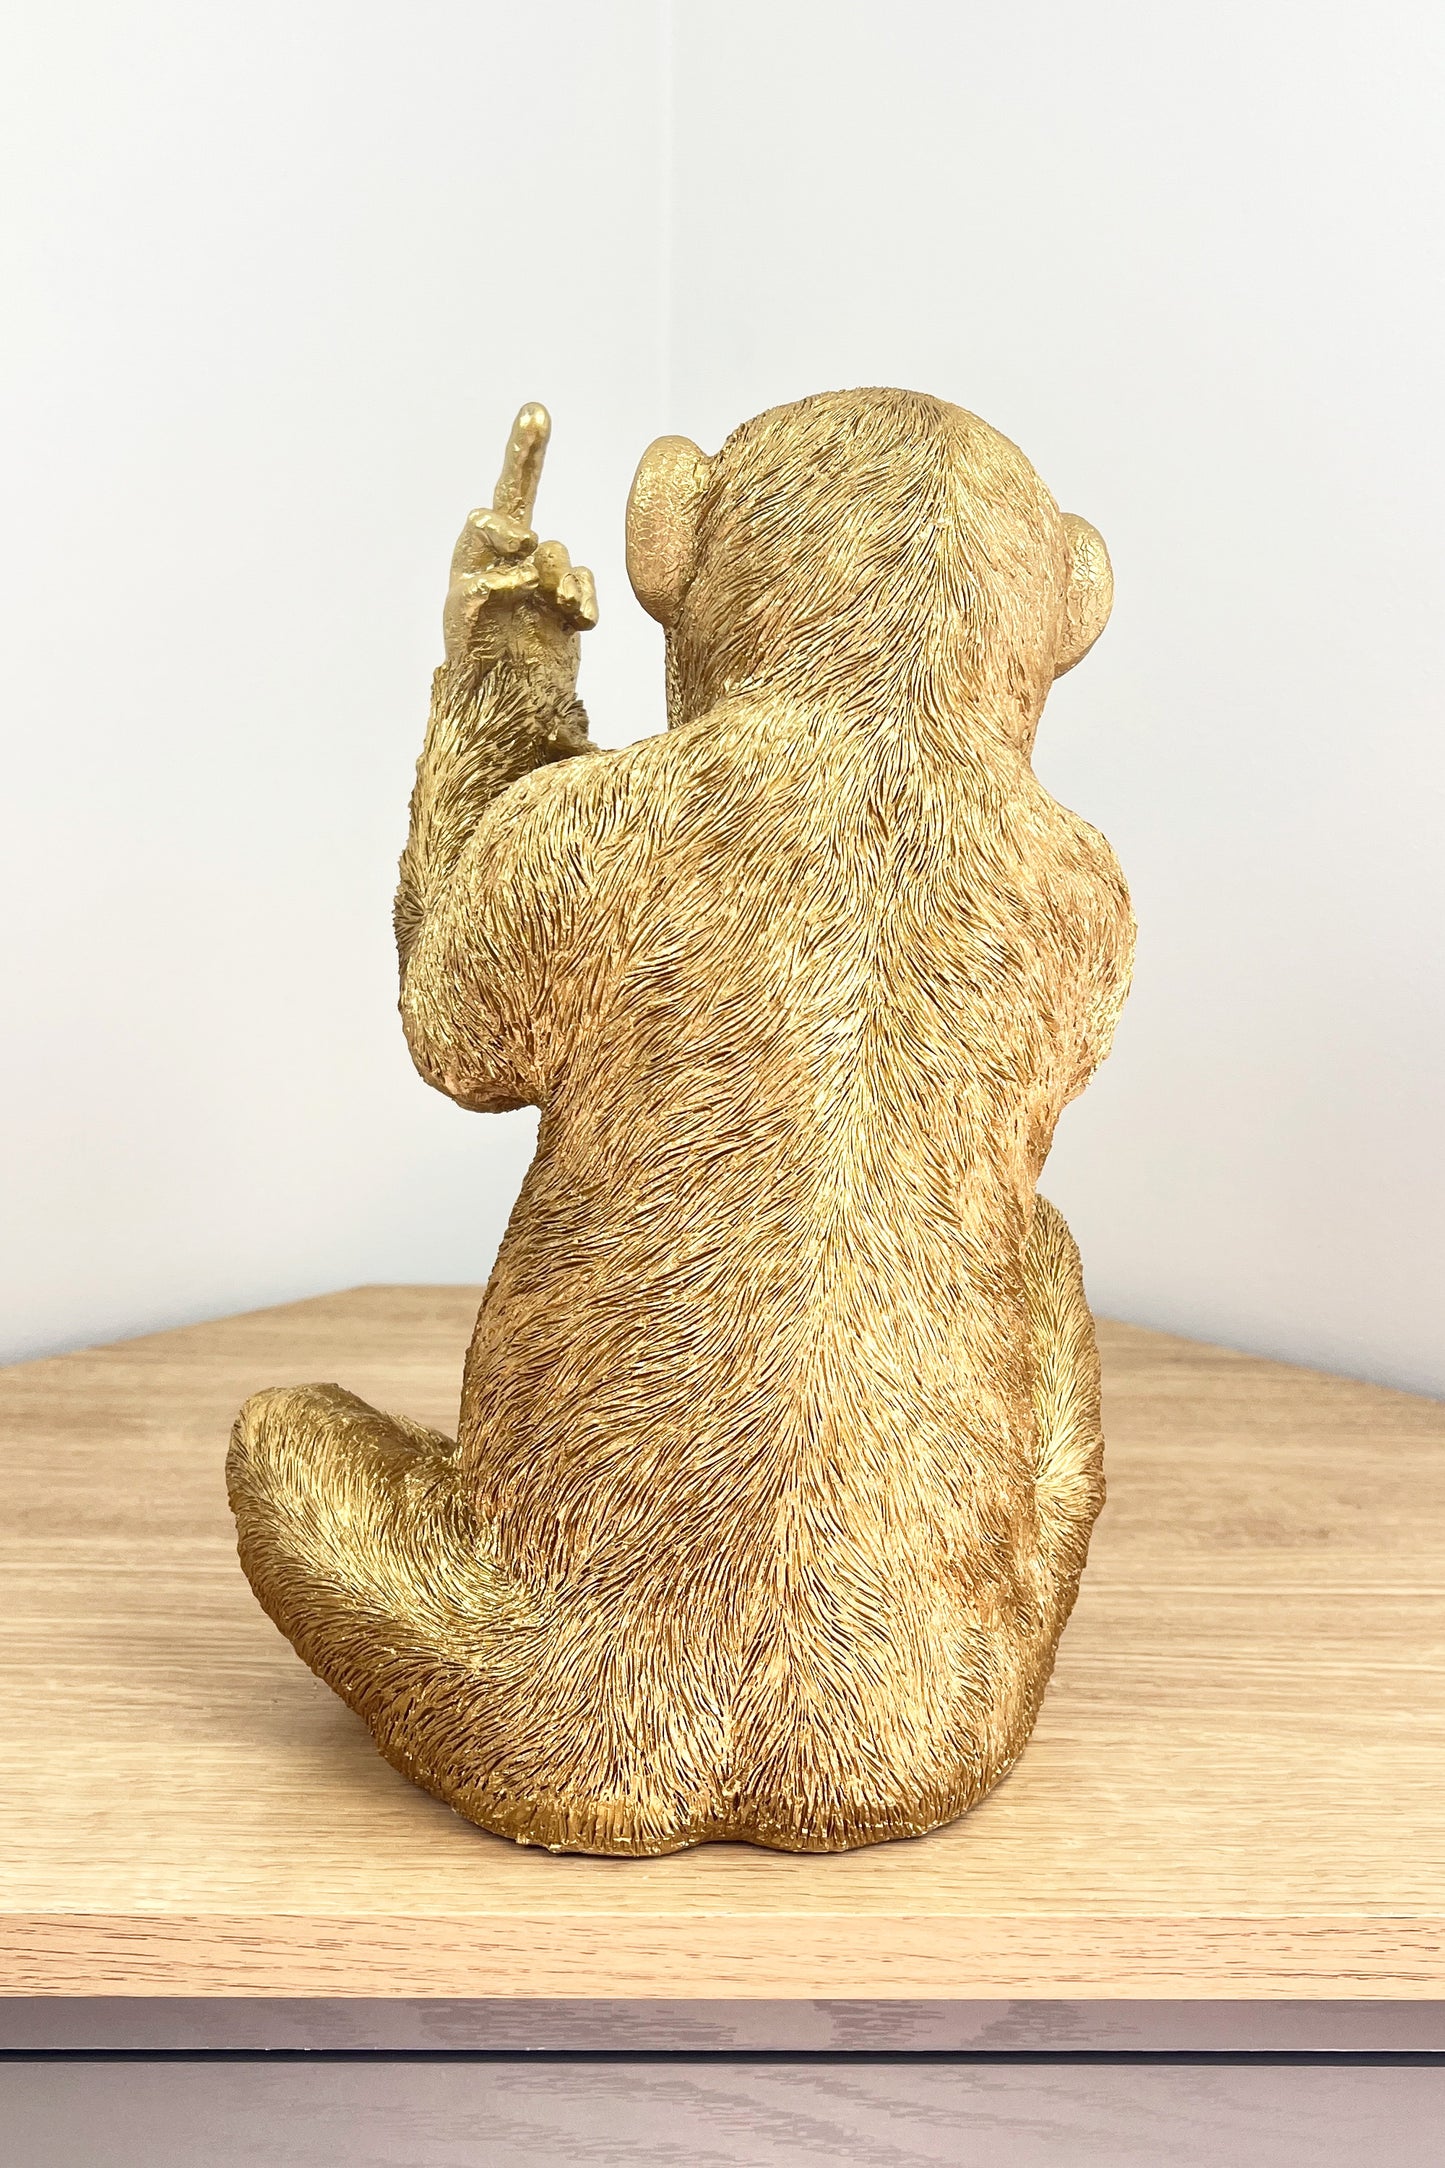 Gold Swearing Monkey Giving the Finger Ornament - Resin